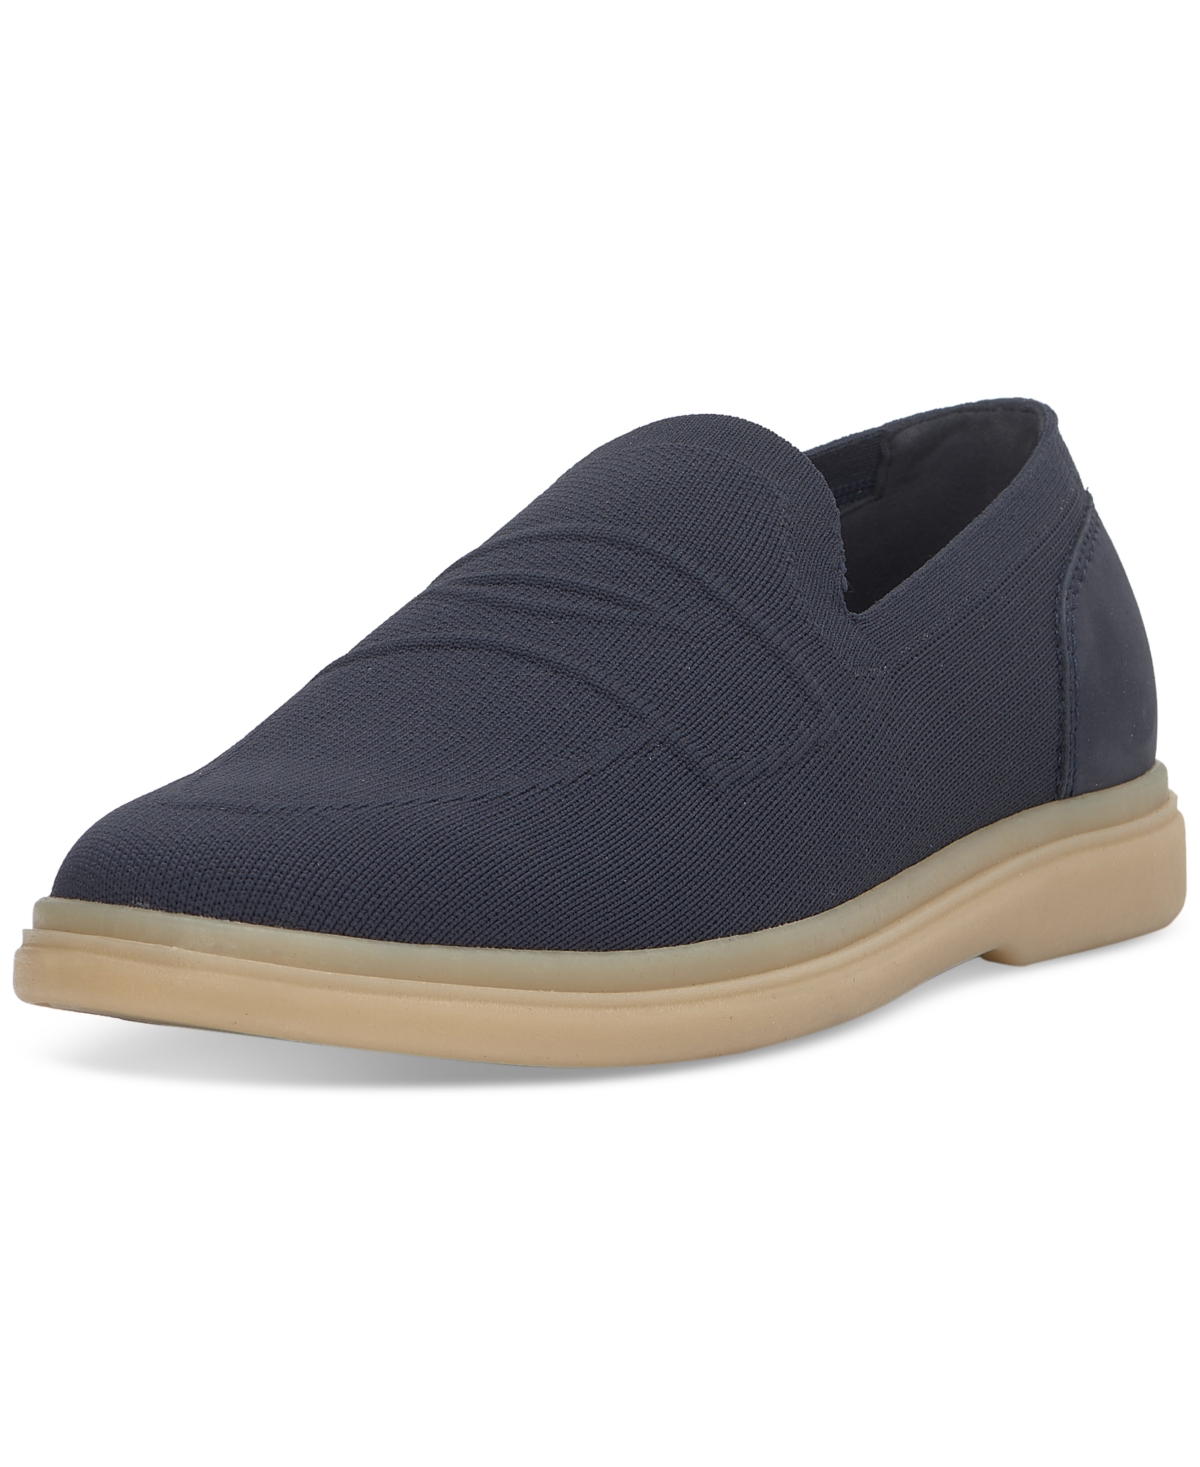 Men's Carsynn Casual Loafers - ECLIPSE/NOTTE